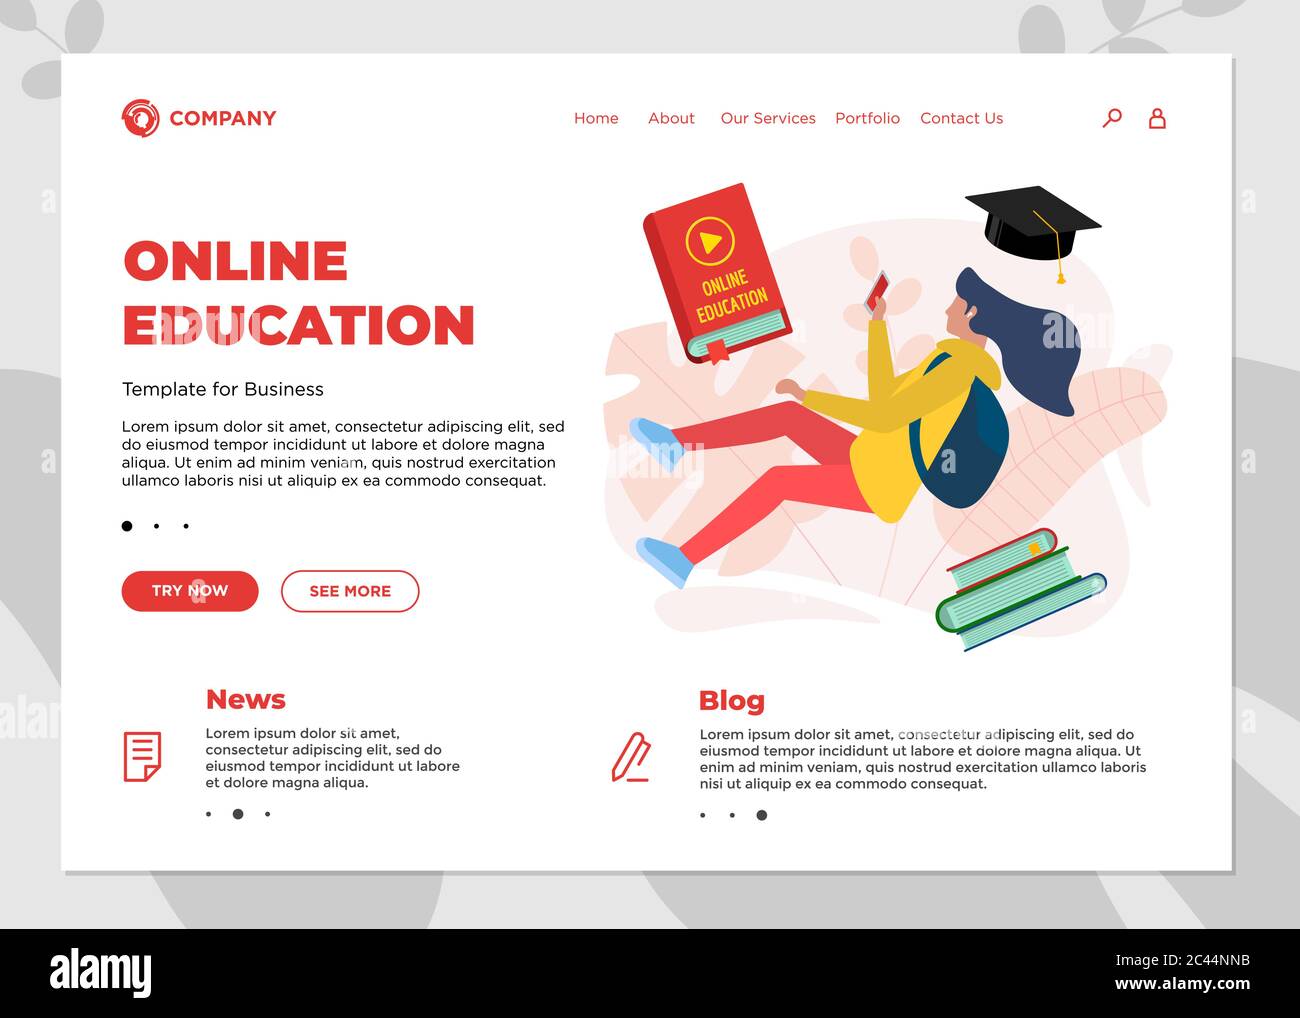 Download Online Education Course Landing Page Template E Learning Website Mockup With Student Teenager Female And Play Video Sign On Cover Book Remote Learning And Internet Studying Knowledge Webinar Concept Stock Vector Image